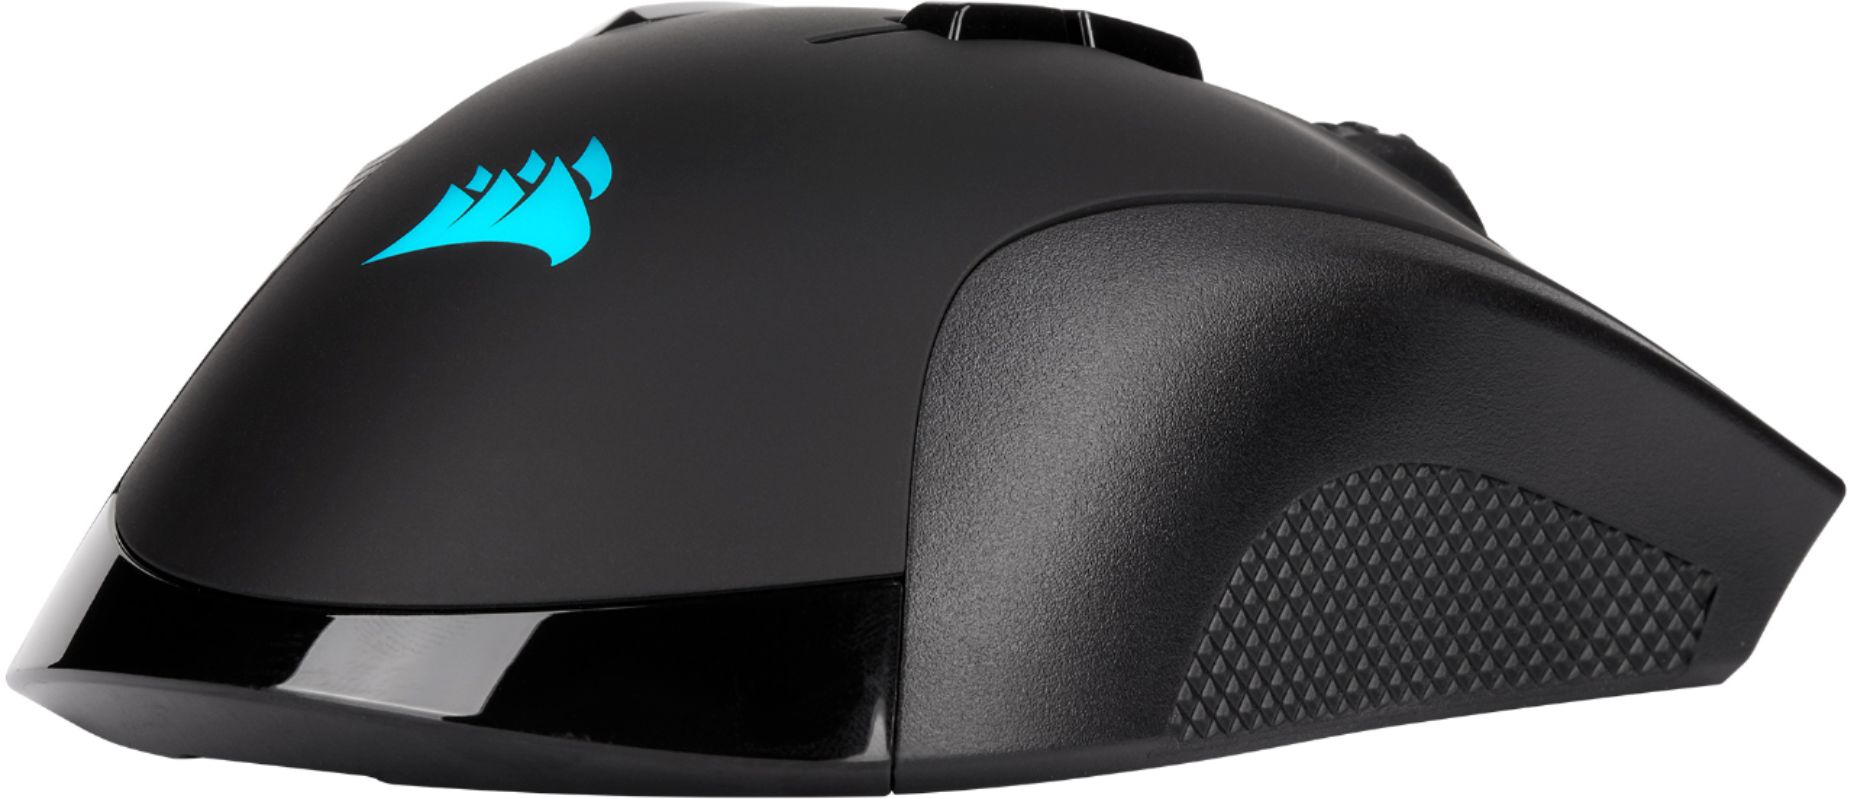 Corsair Ironclaw Wireless RGB - FPS and MOBA Gaming Mouse - 18,000 DPI  Optical Sensor - Sub-1 ms